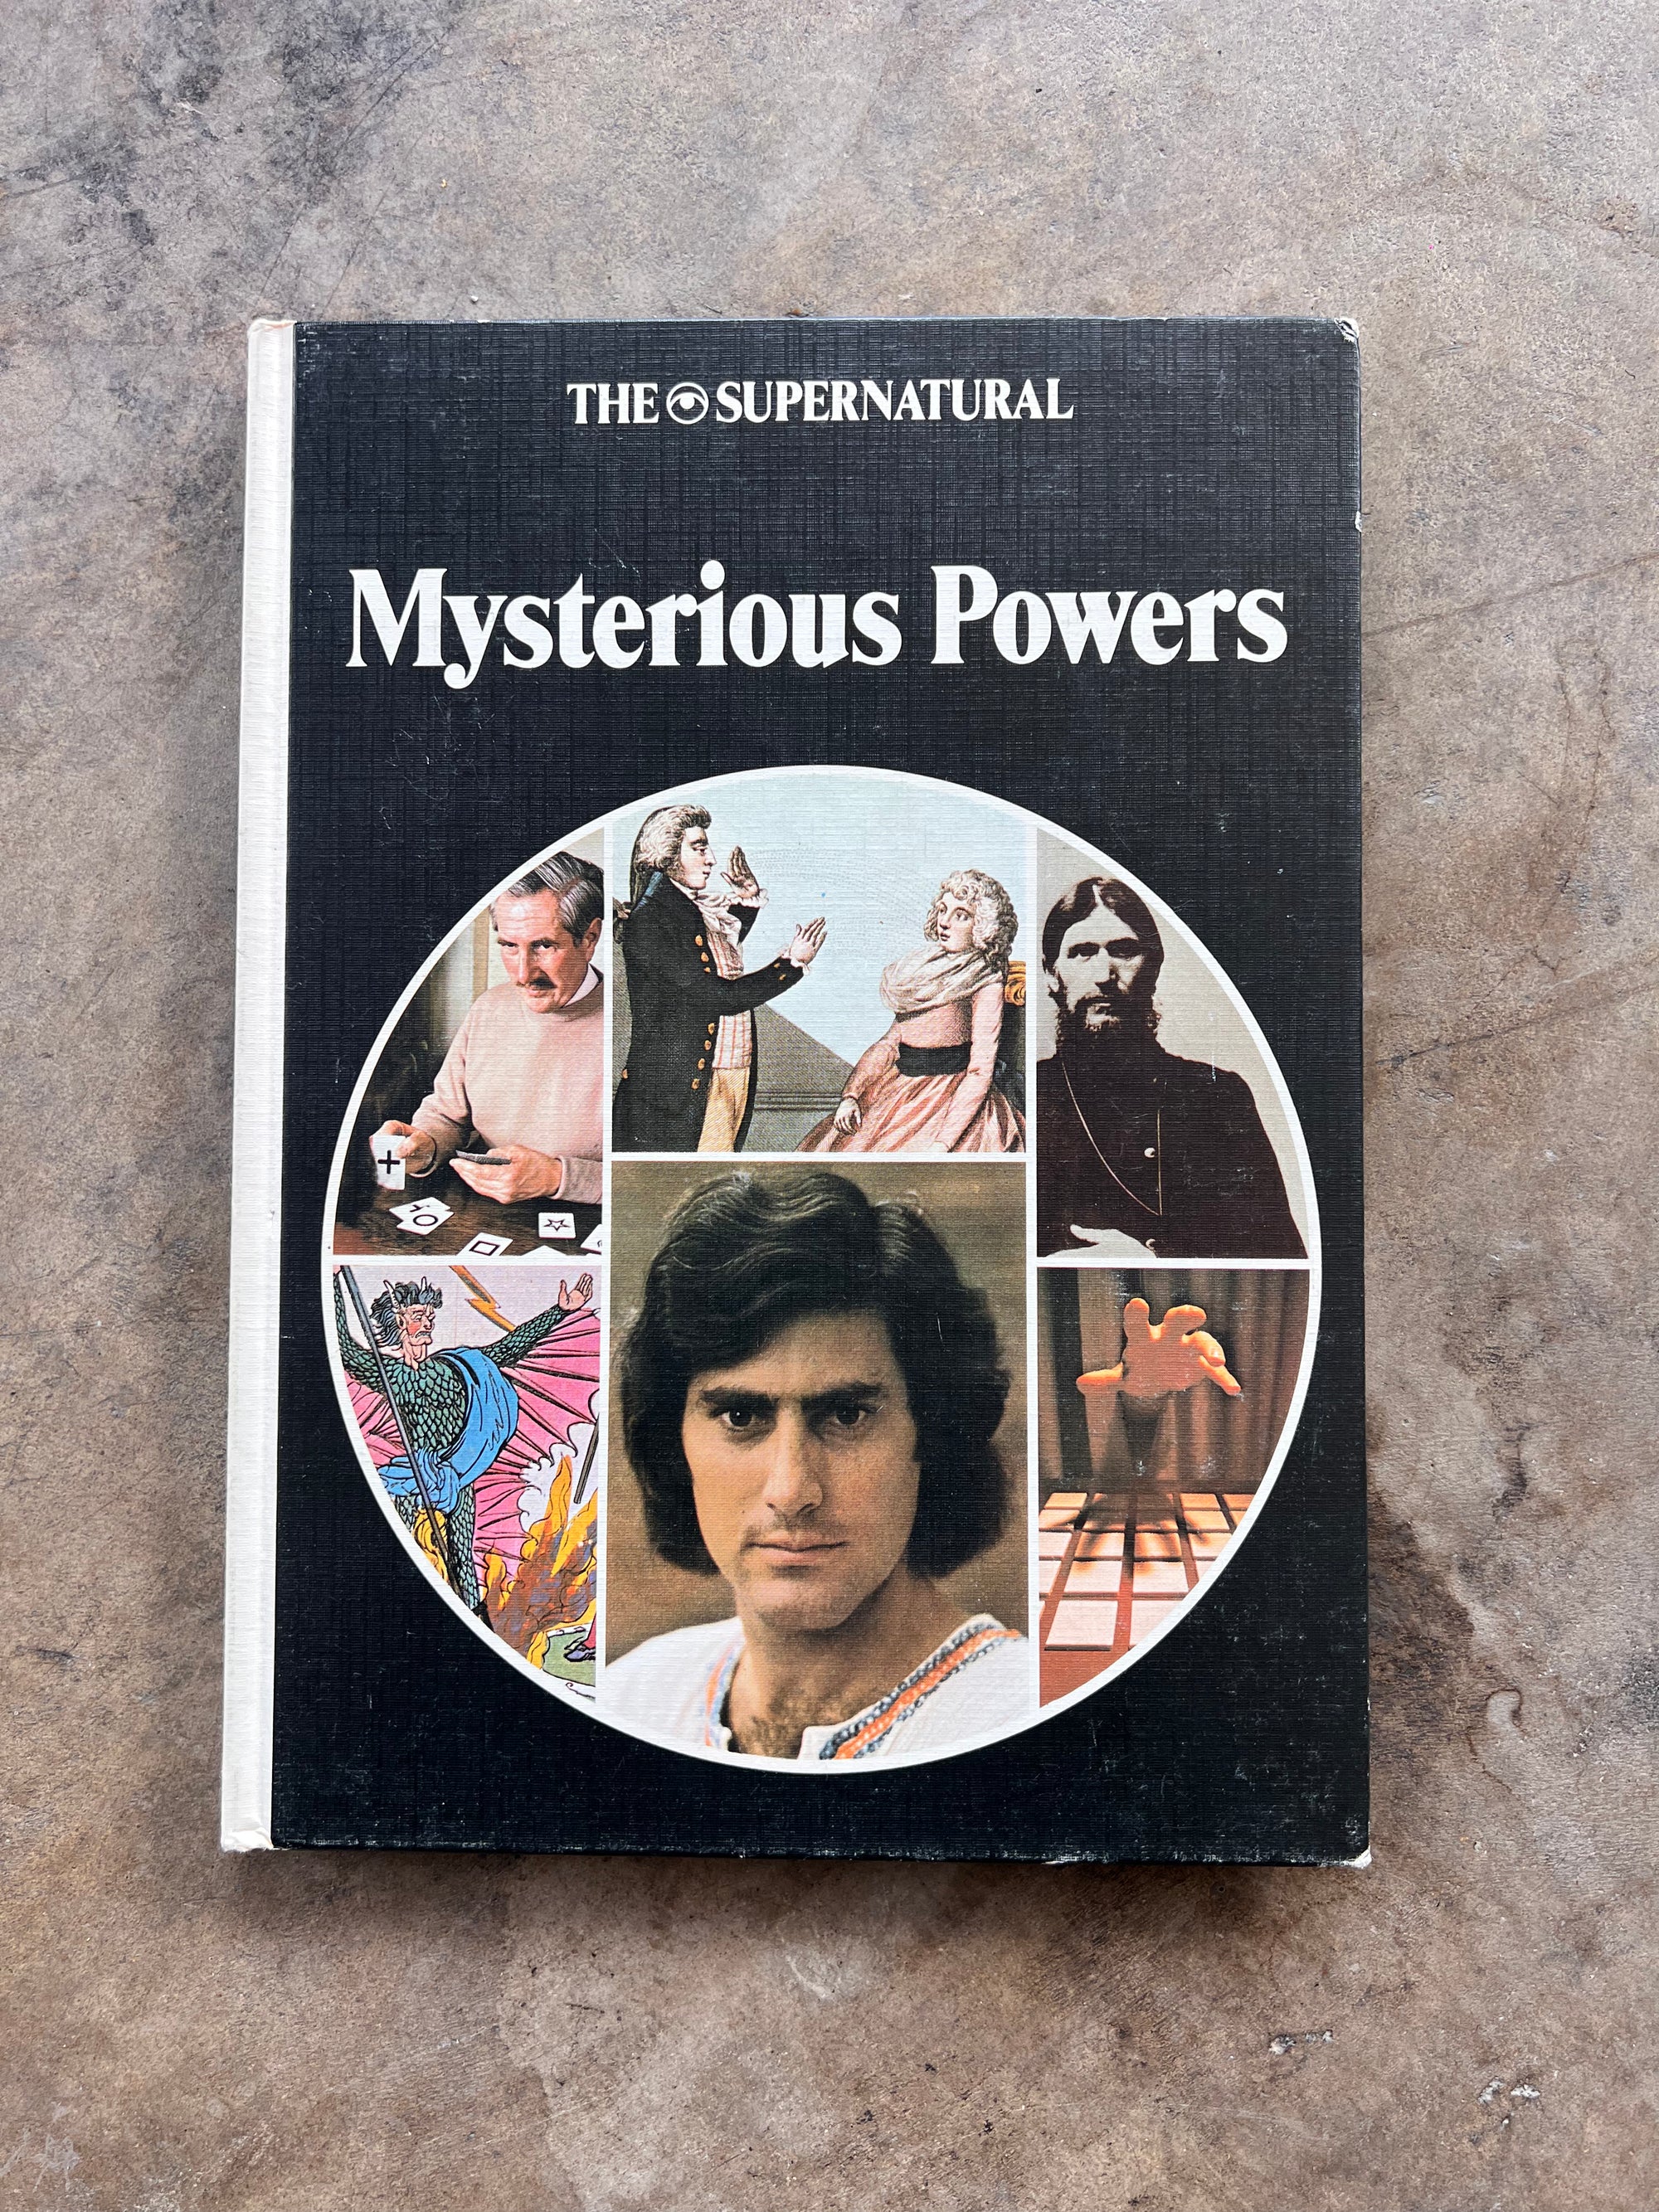 The Supernatural "Mysterious Powers"